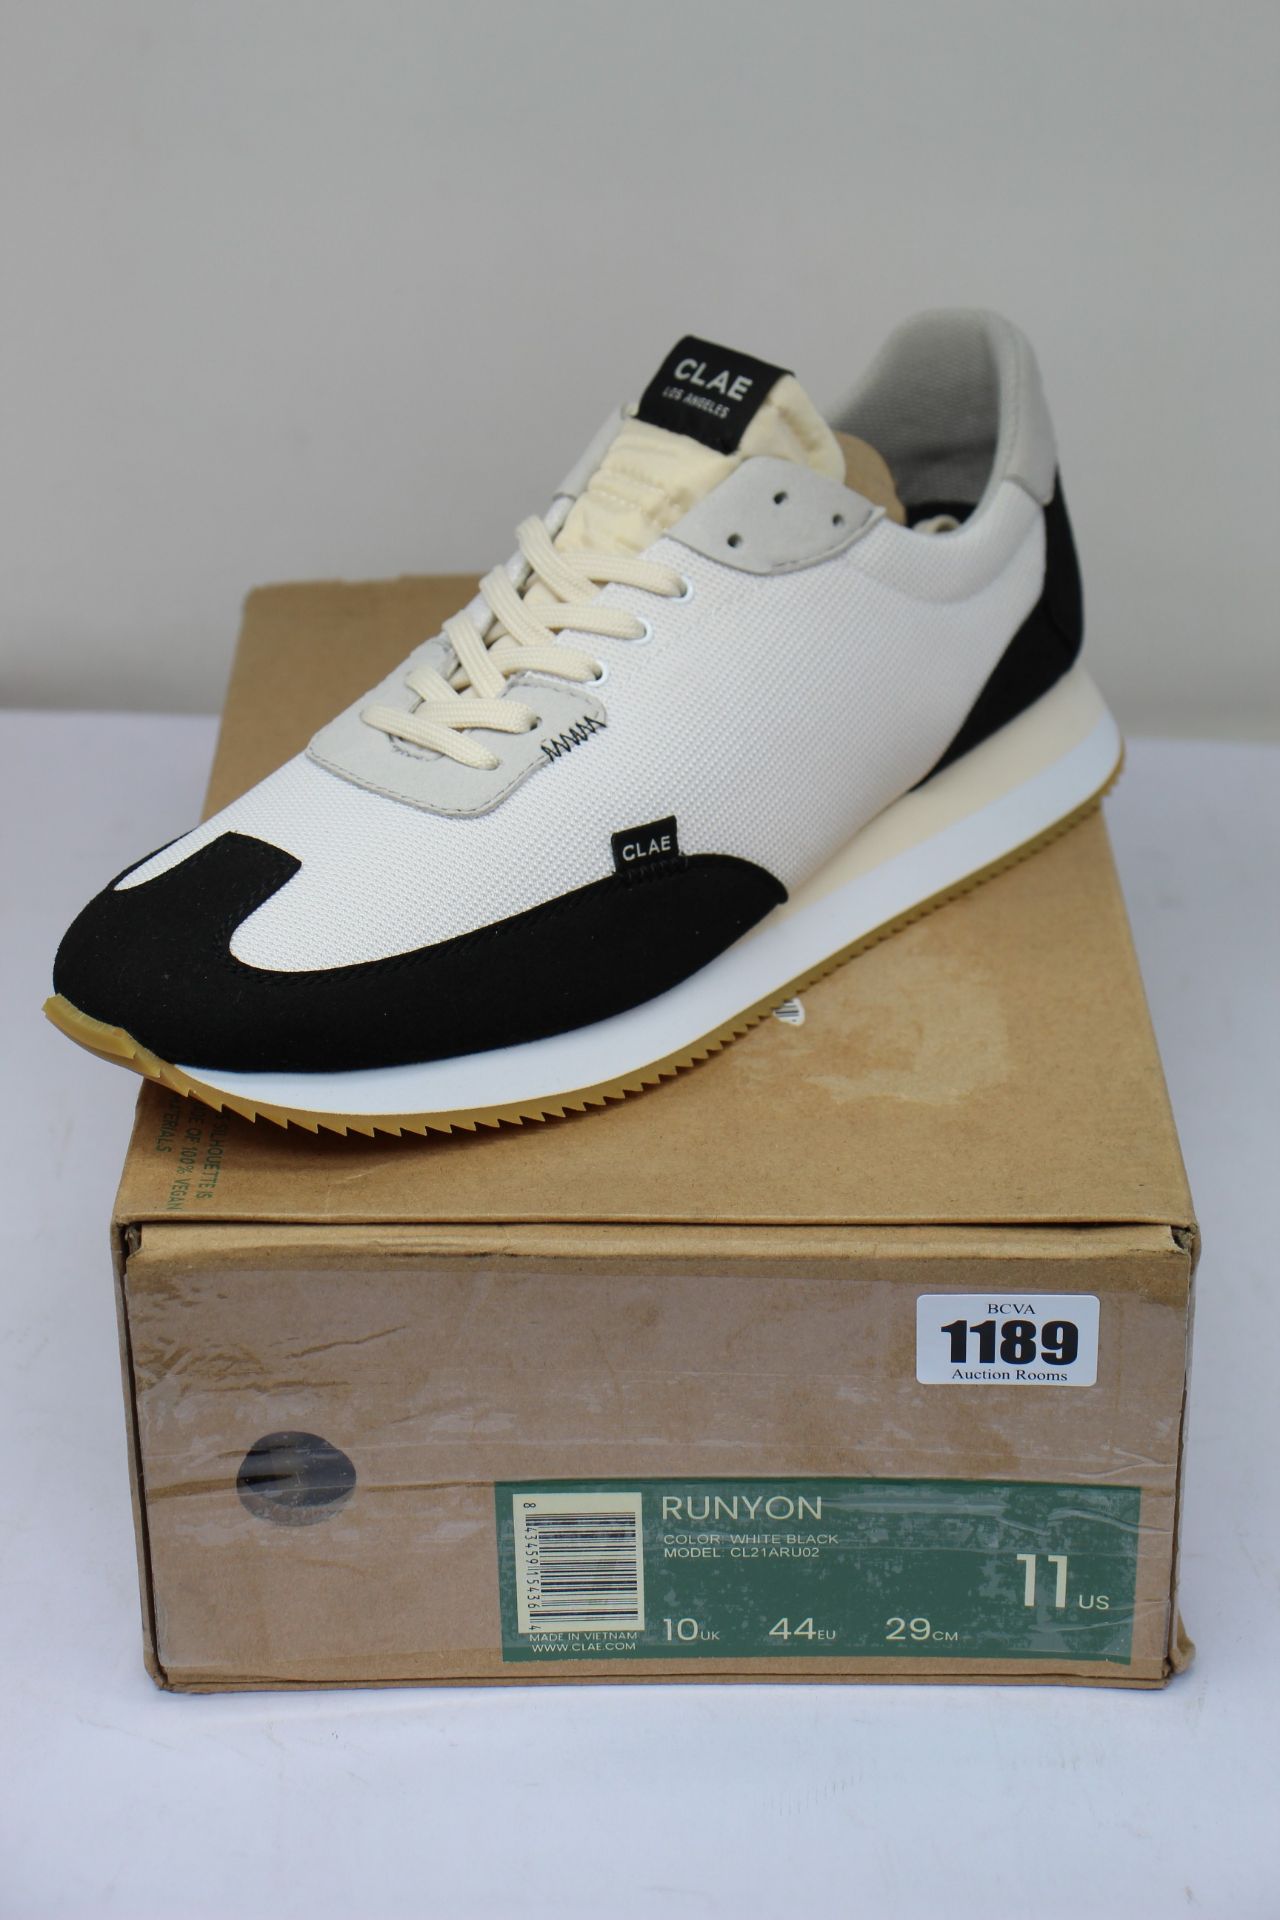 A pair of as new Clae Los Angeles Runyon sneakers (UK 10).